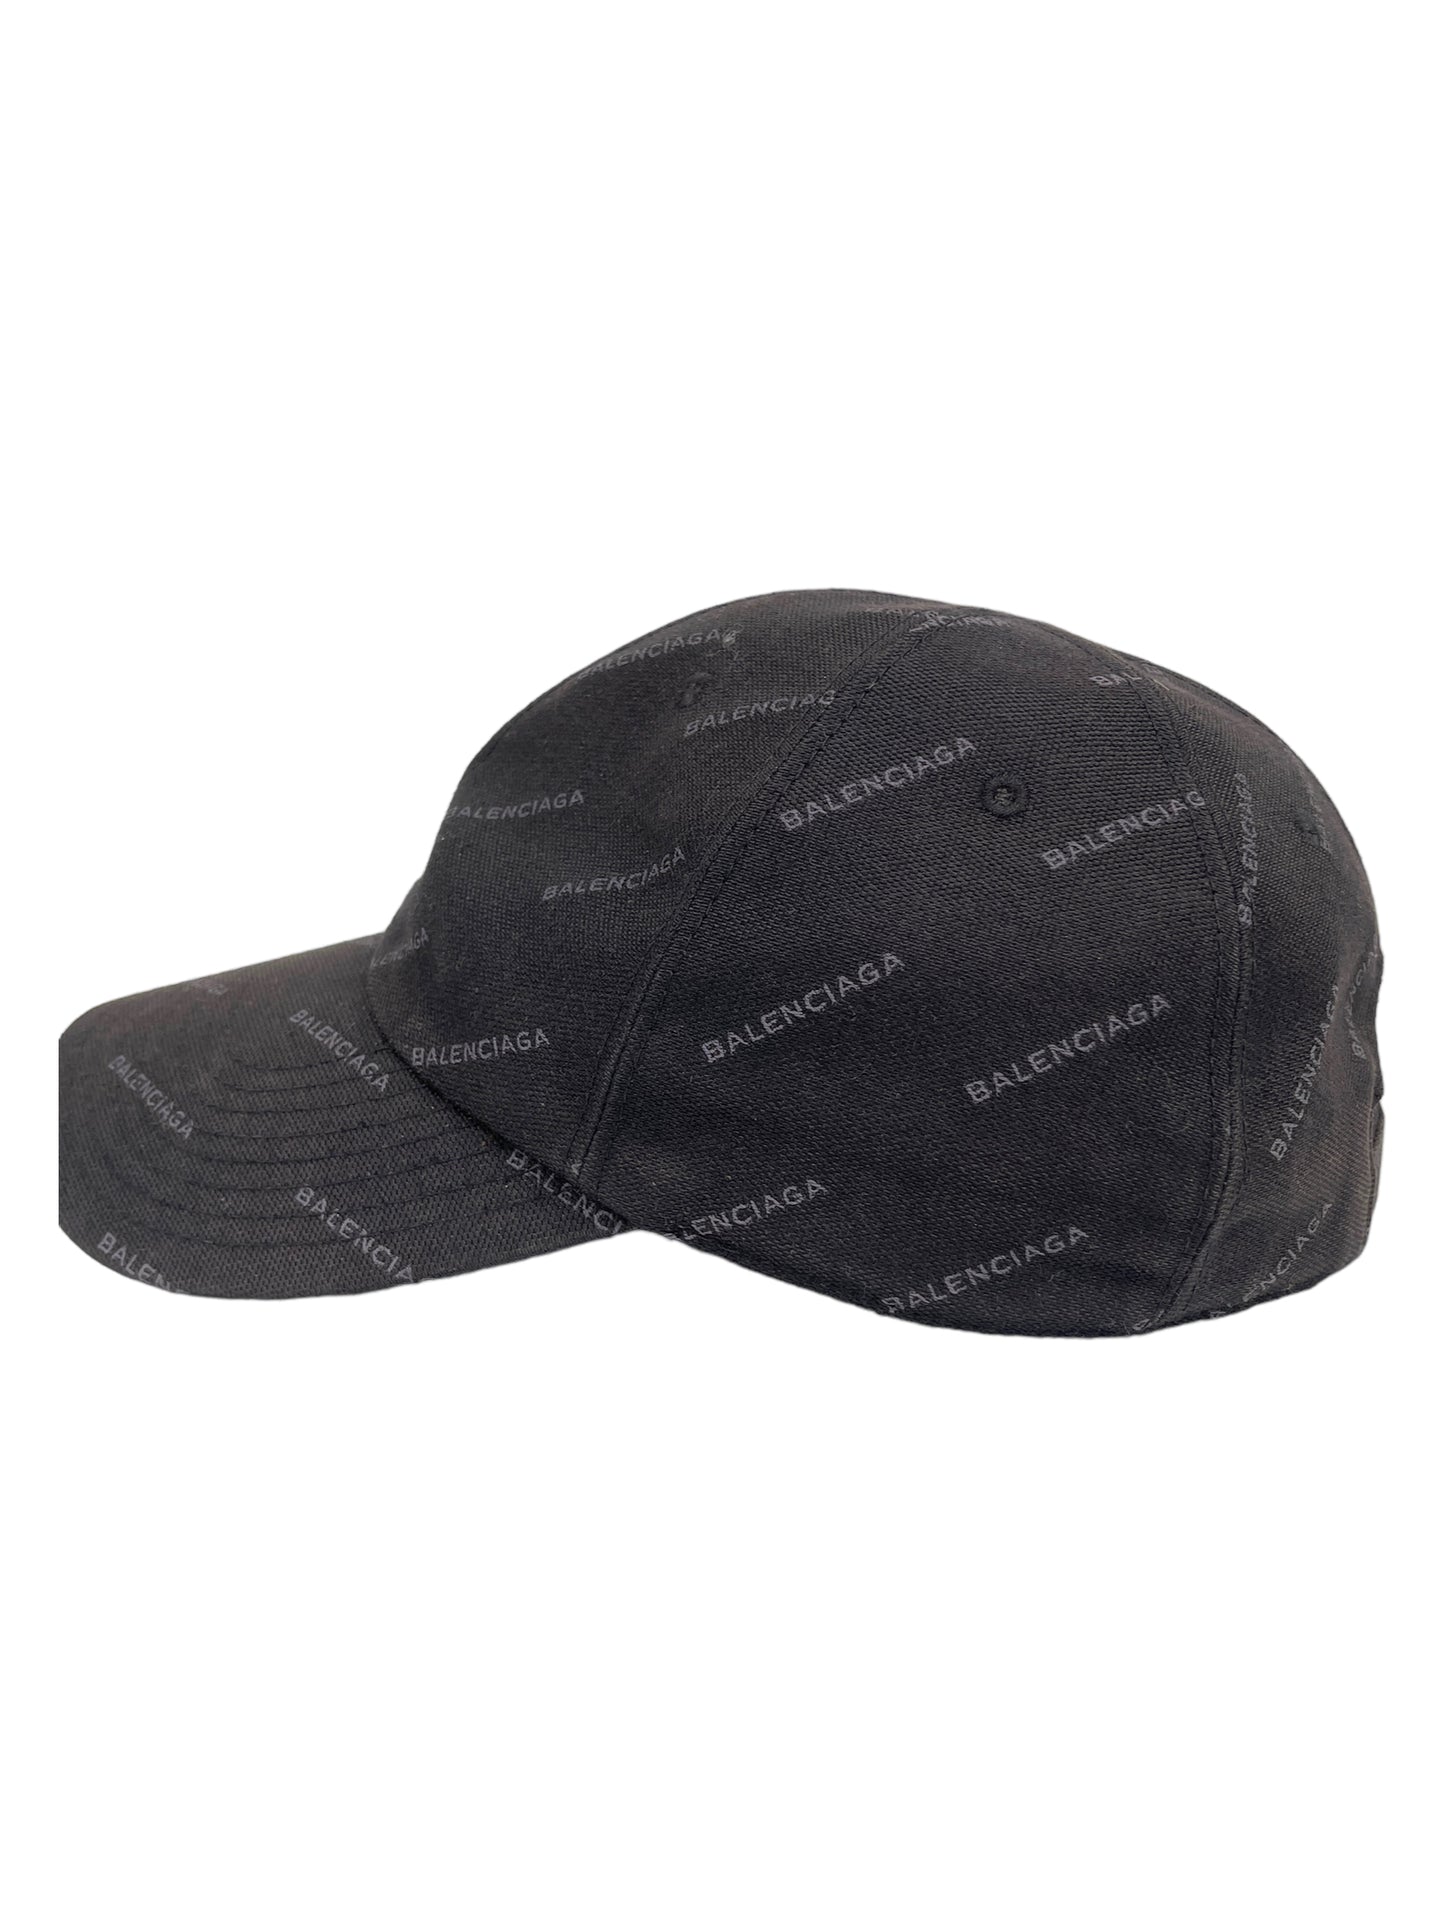 Balenciaga Black Repeating Logo Baseball Cap — Genuine Design luxury consignment Calgary, Alberta, Canada New and pre-owned clothing, shoes, accessories.